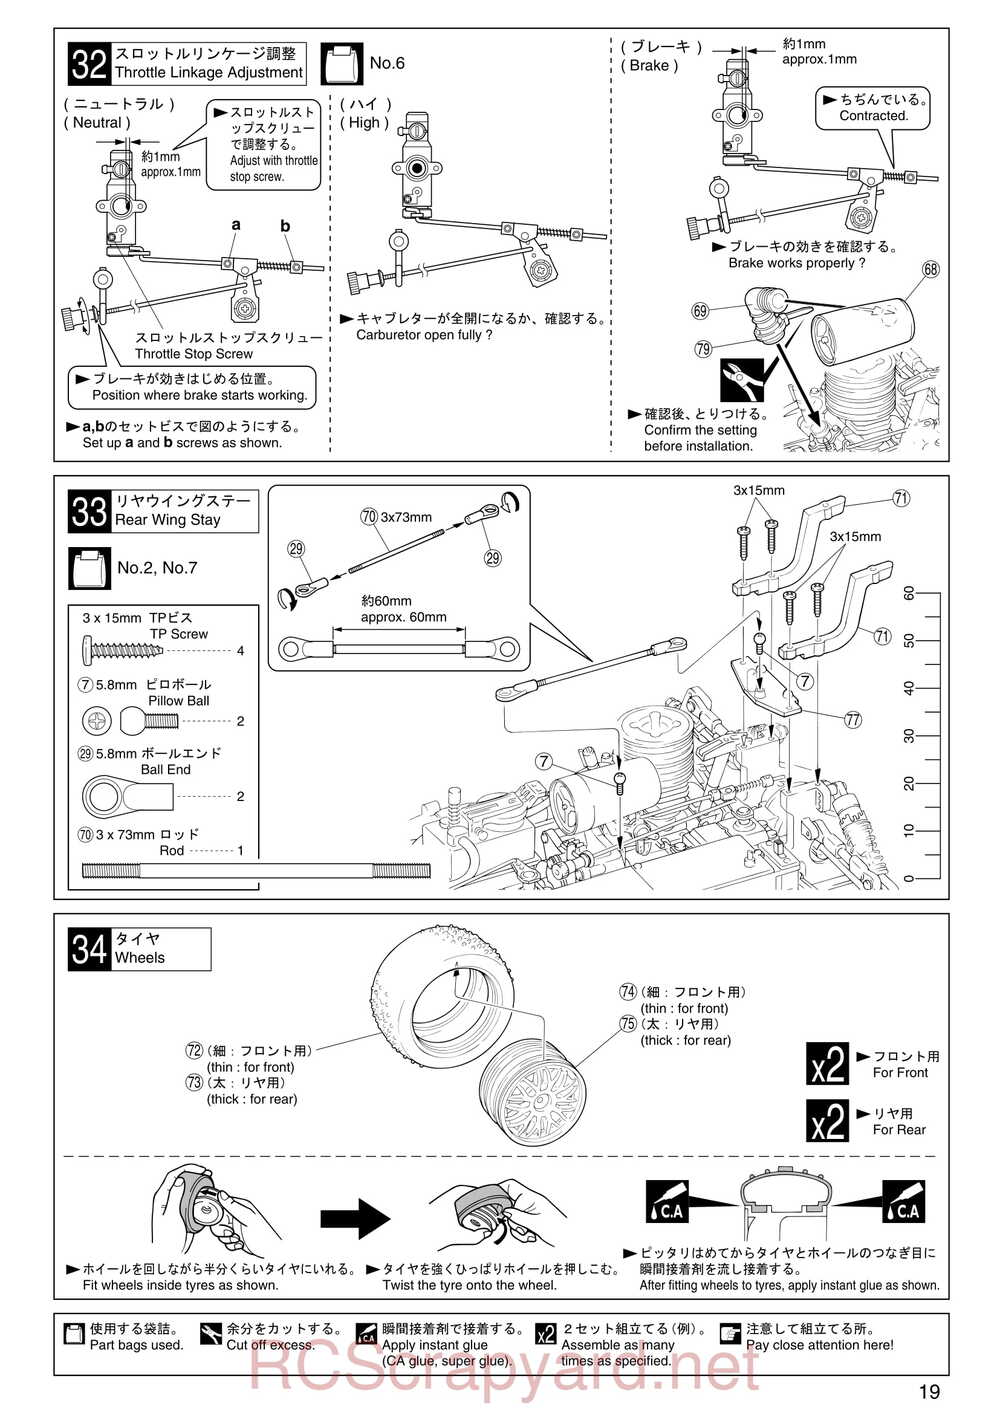 Kyosho - 31091 - Inferno-TR15 - Manual - Page 19